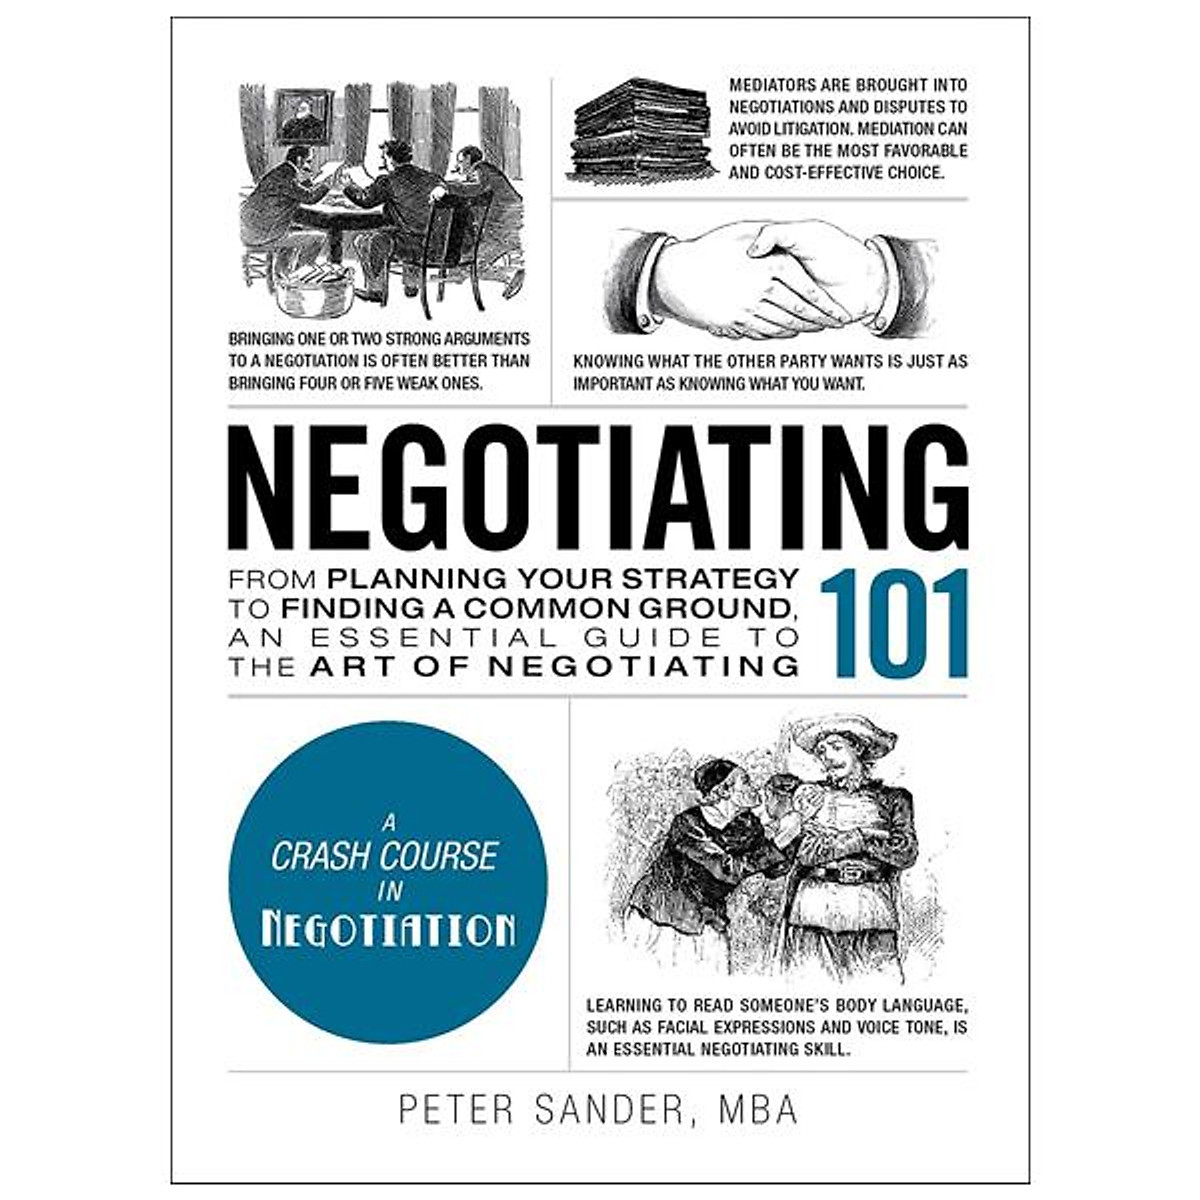 Negotiating 101 : From Planning Your Strategy To Finding A Common Ground, An Essential Guide To The Art Of Negotiating